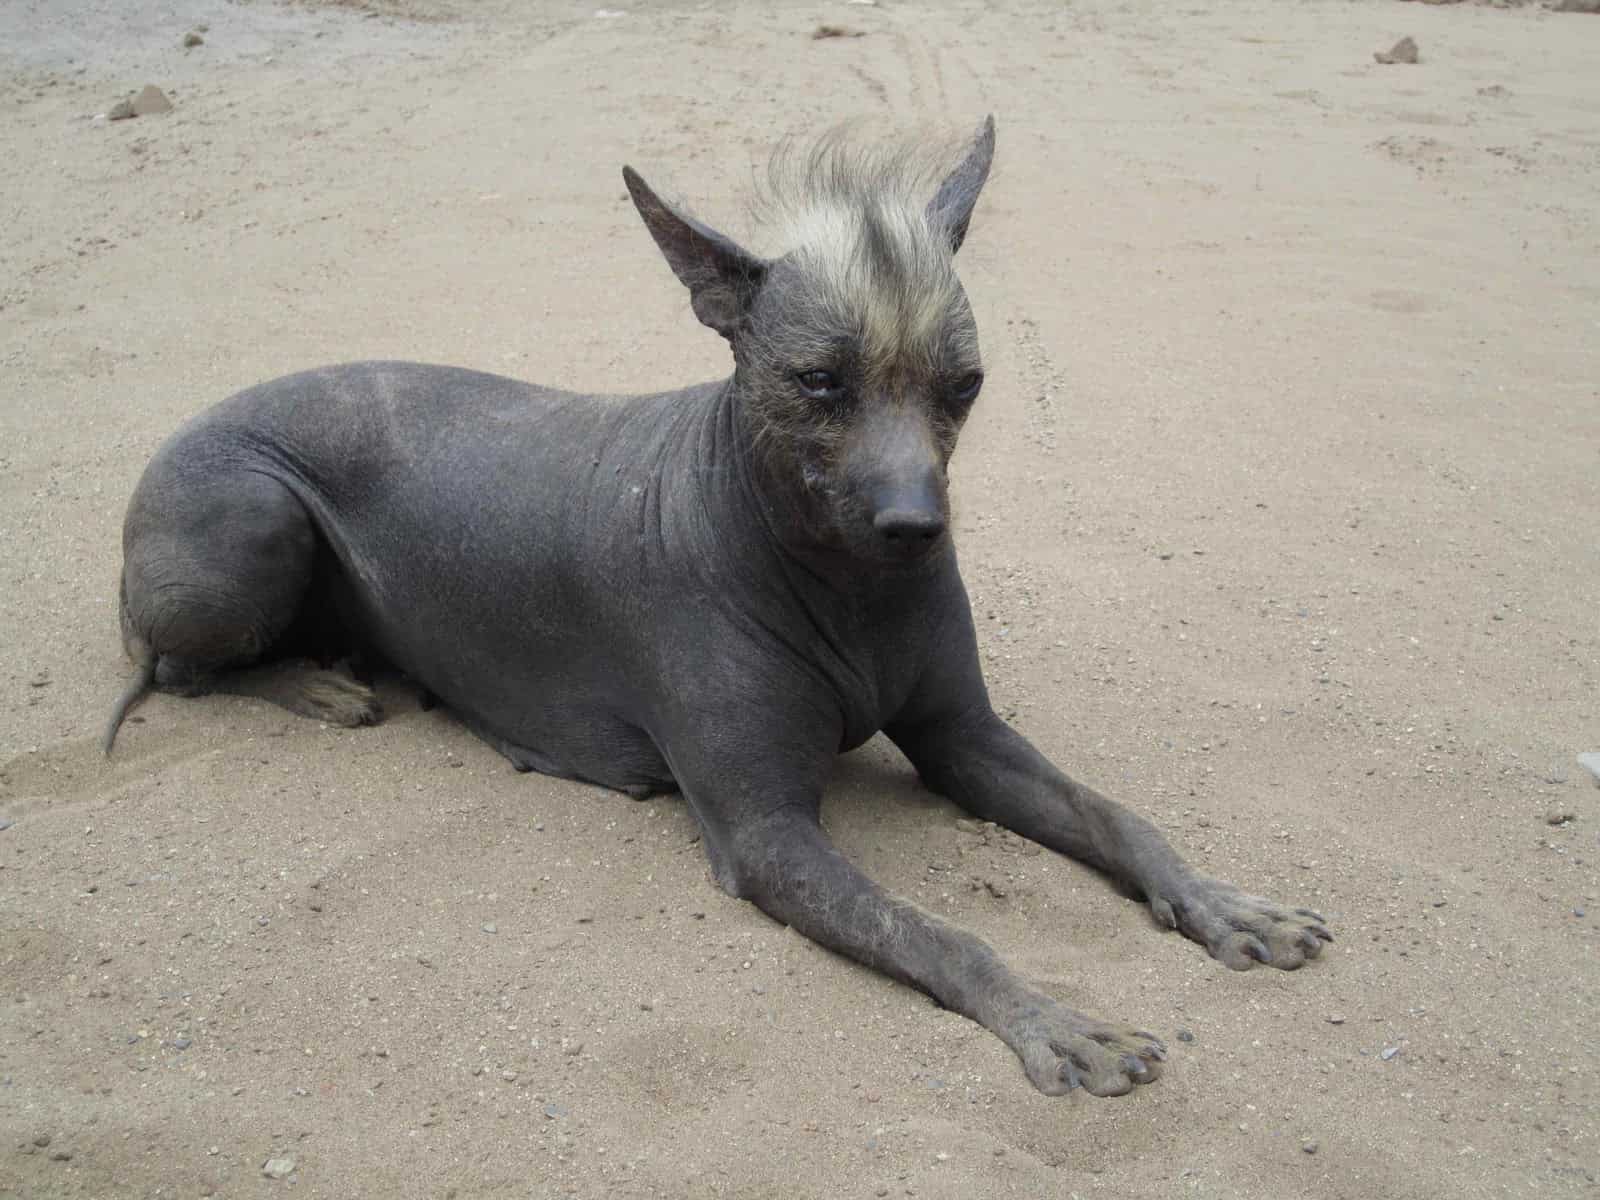 Hairless khala can have short or long legs, and is a docile animal.